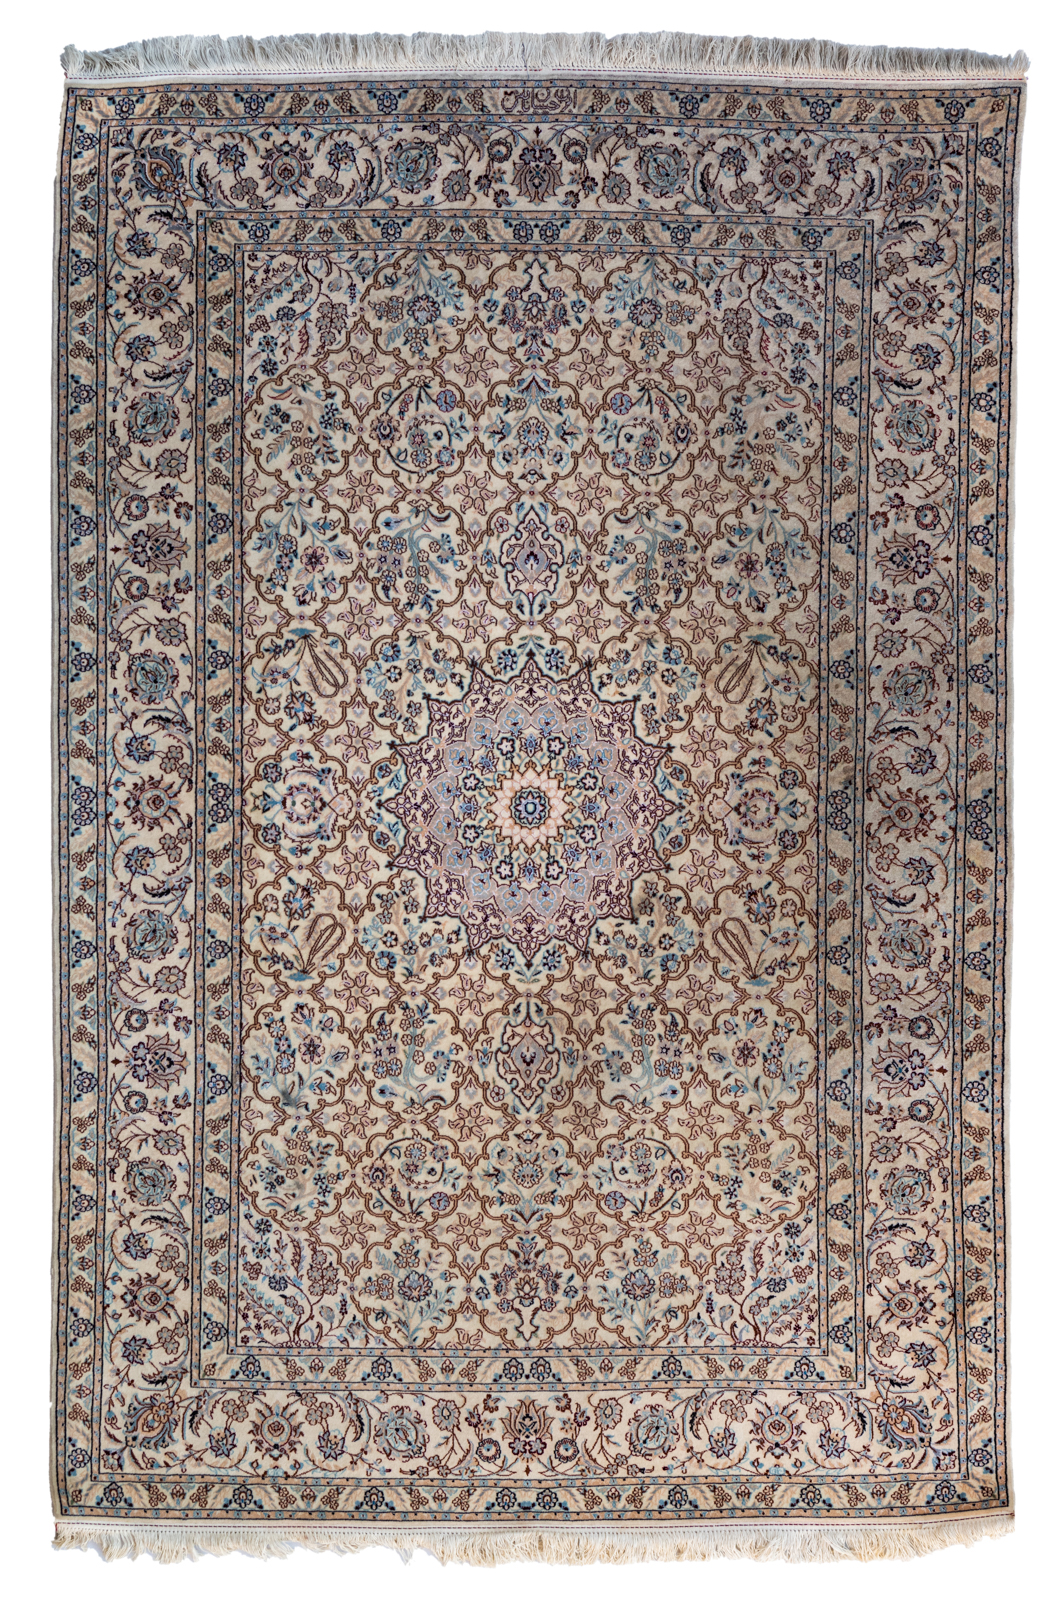 An Oriental woollen rug decorated with floral motifs, signed, 197 x 130 cm